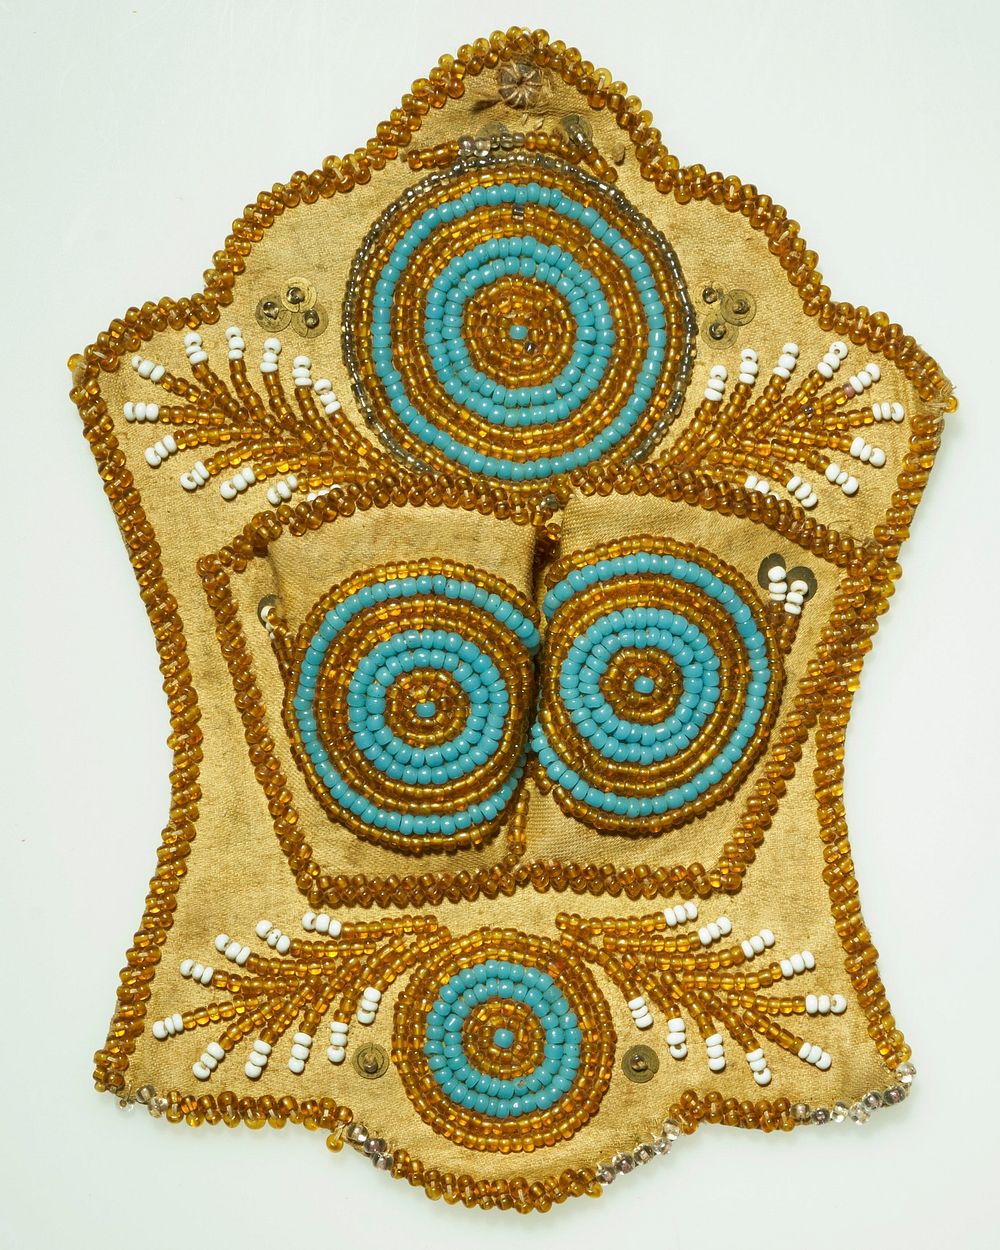 tan front and back; four concentric circle motifs in blue, orange, and grey beads; leaf-like shapes in orange and white…